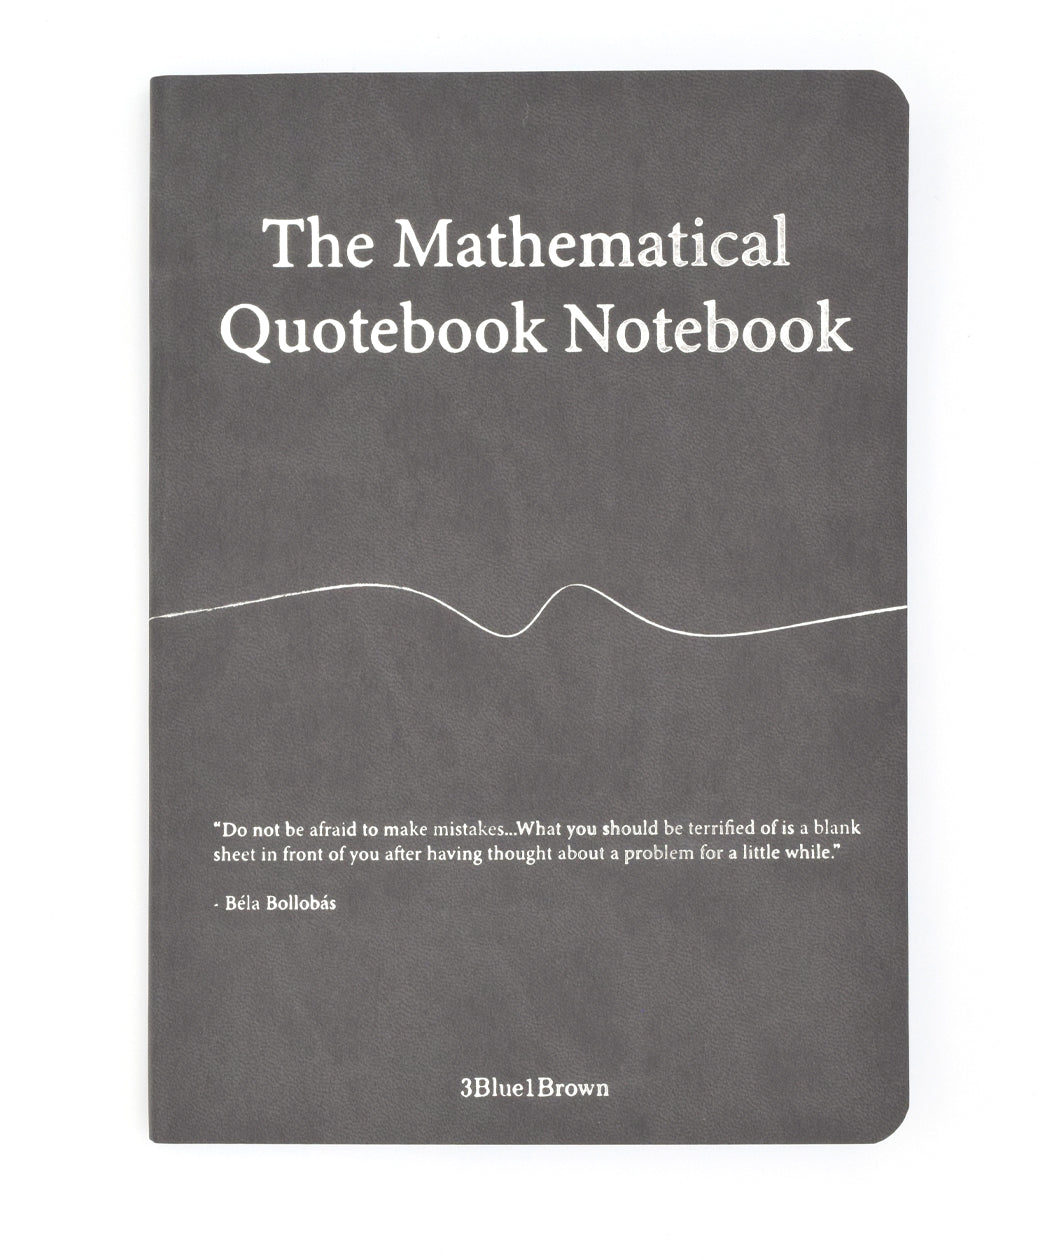 Image of the new 3blue1brown quotebook notebook available on the DFTBA store.